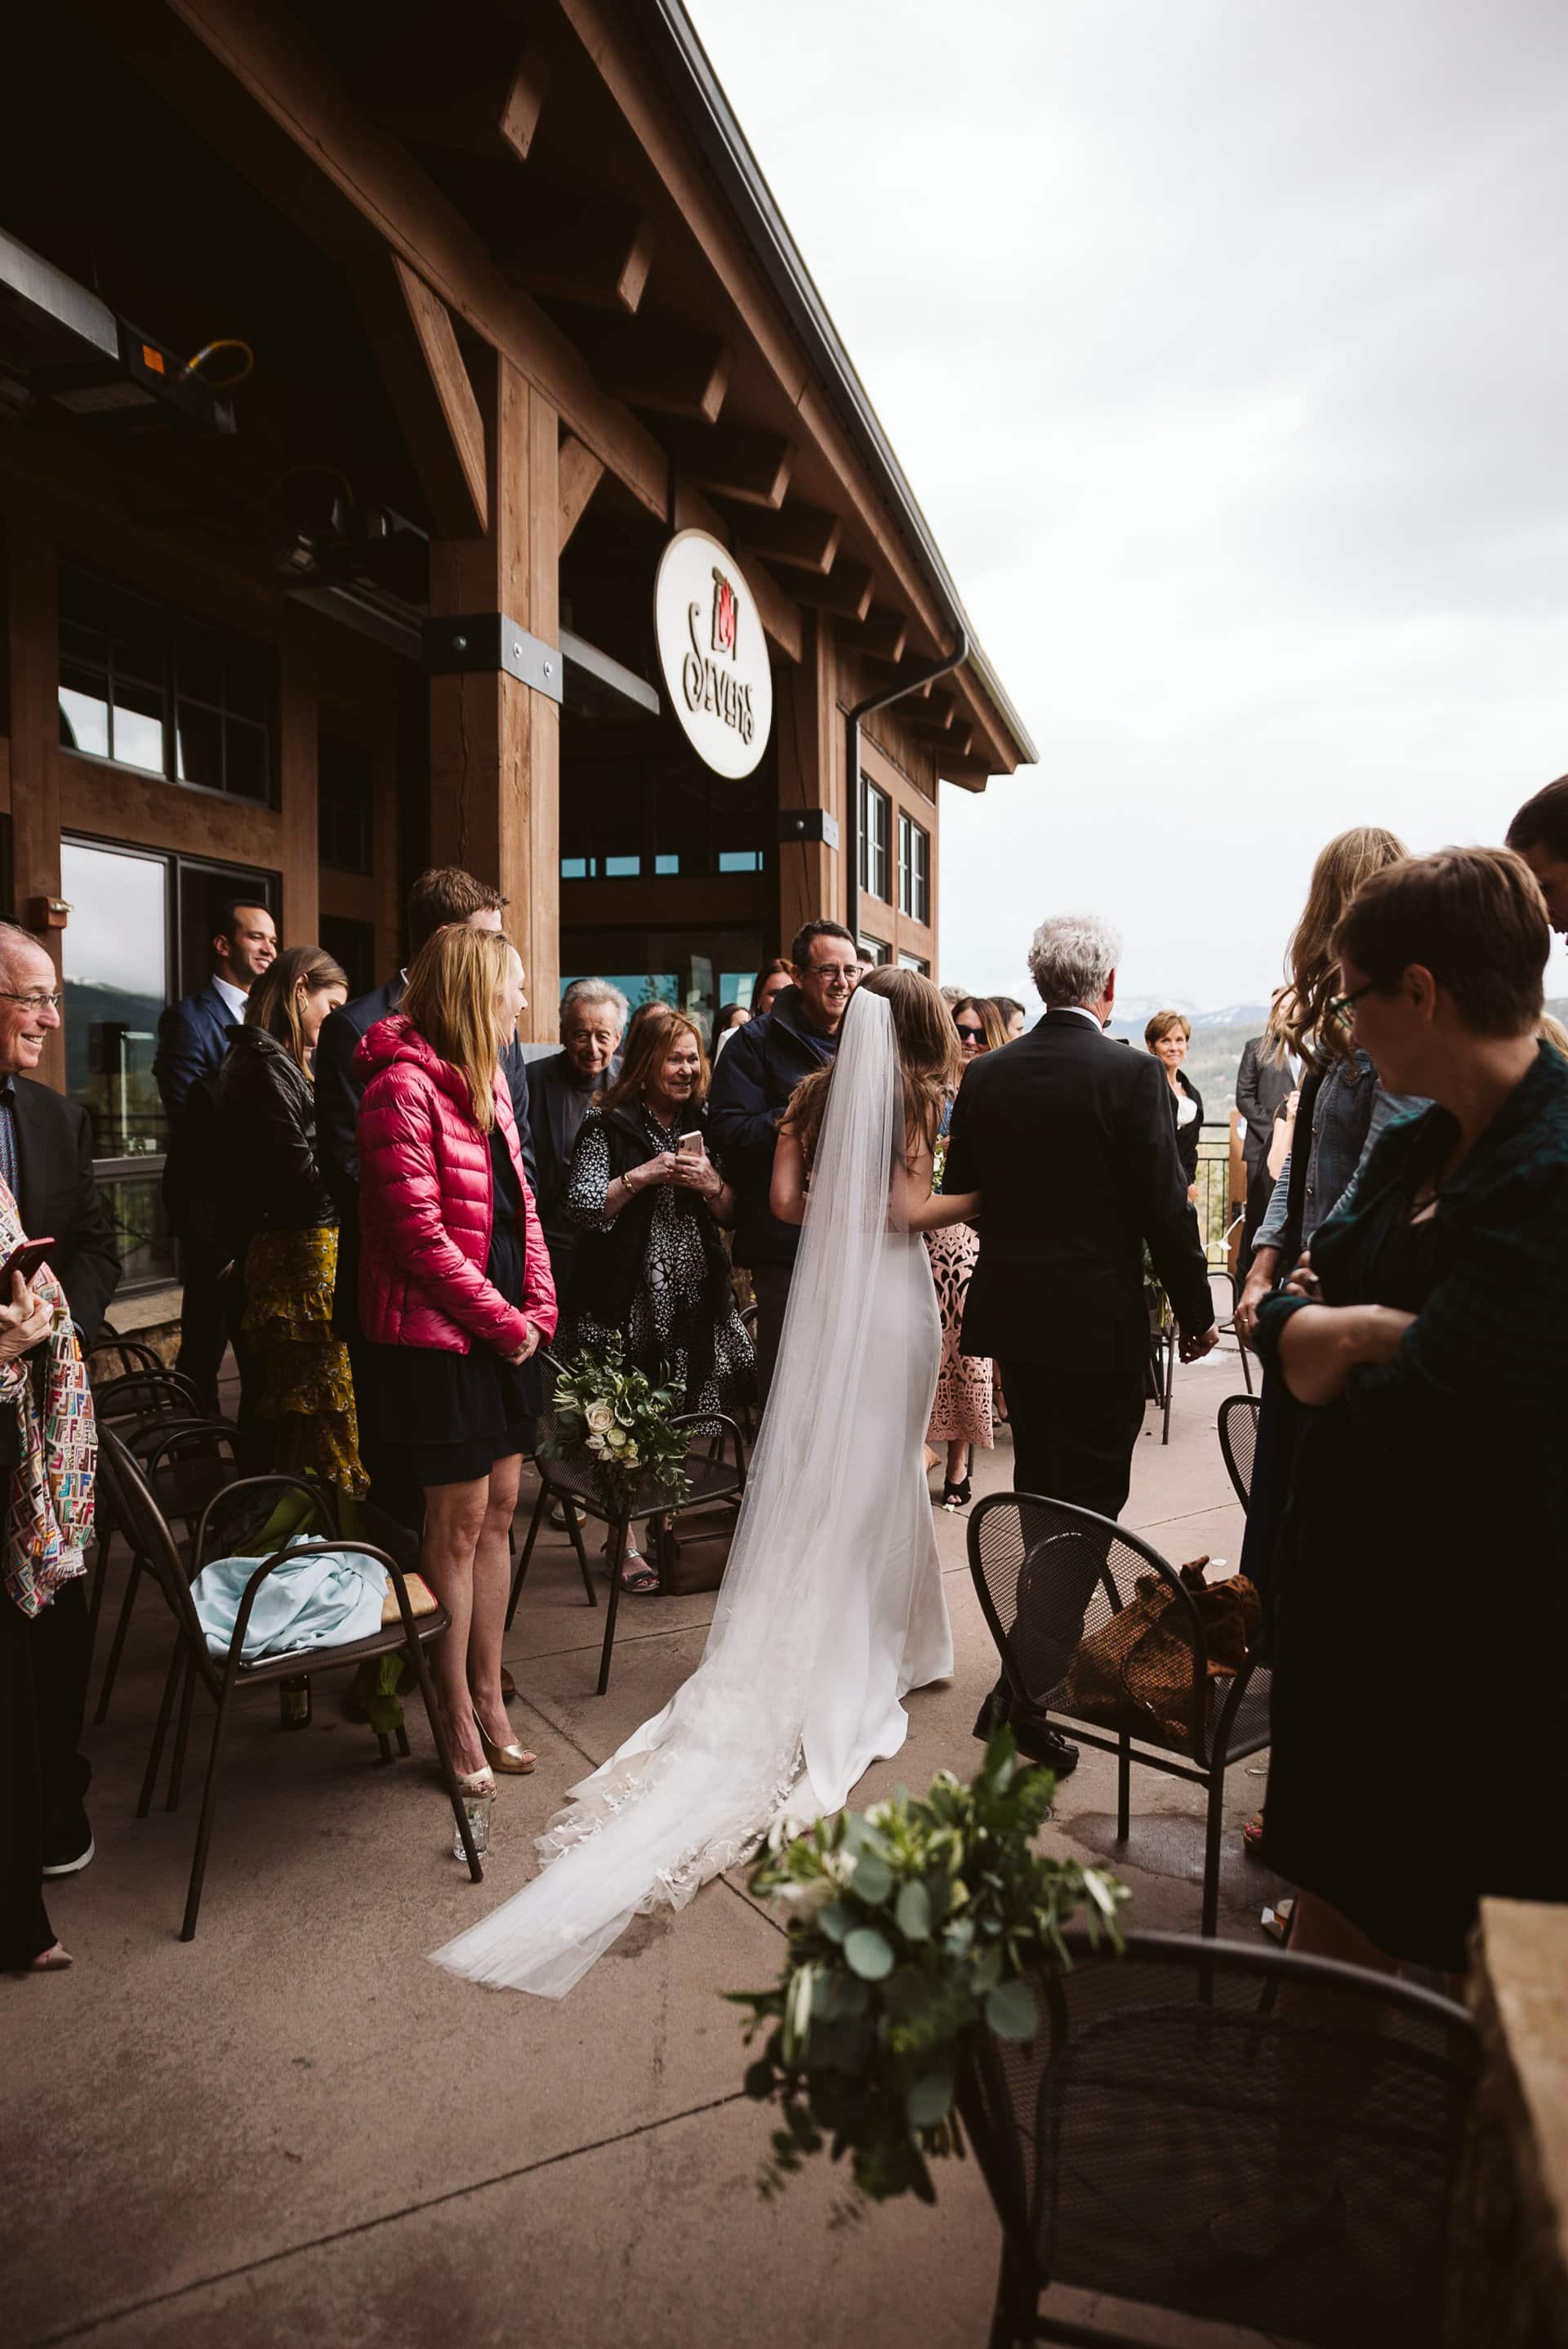 Bride and her father walking down the aisle for wedding ceremony at Breckenridge Ski Resort, Colorado mountain wedding